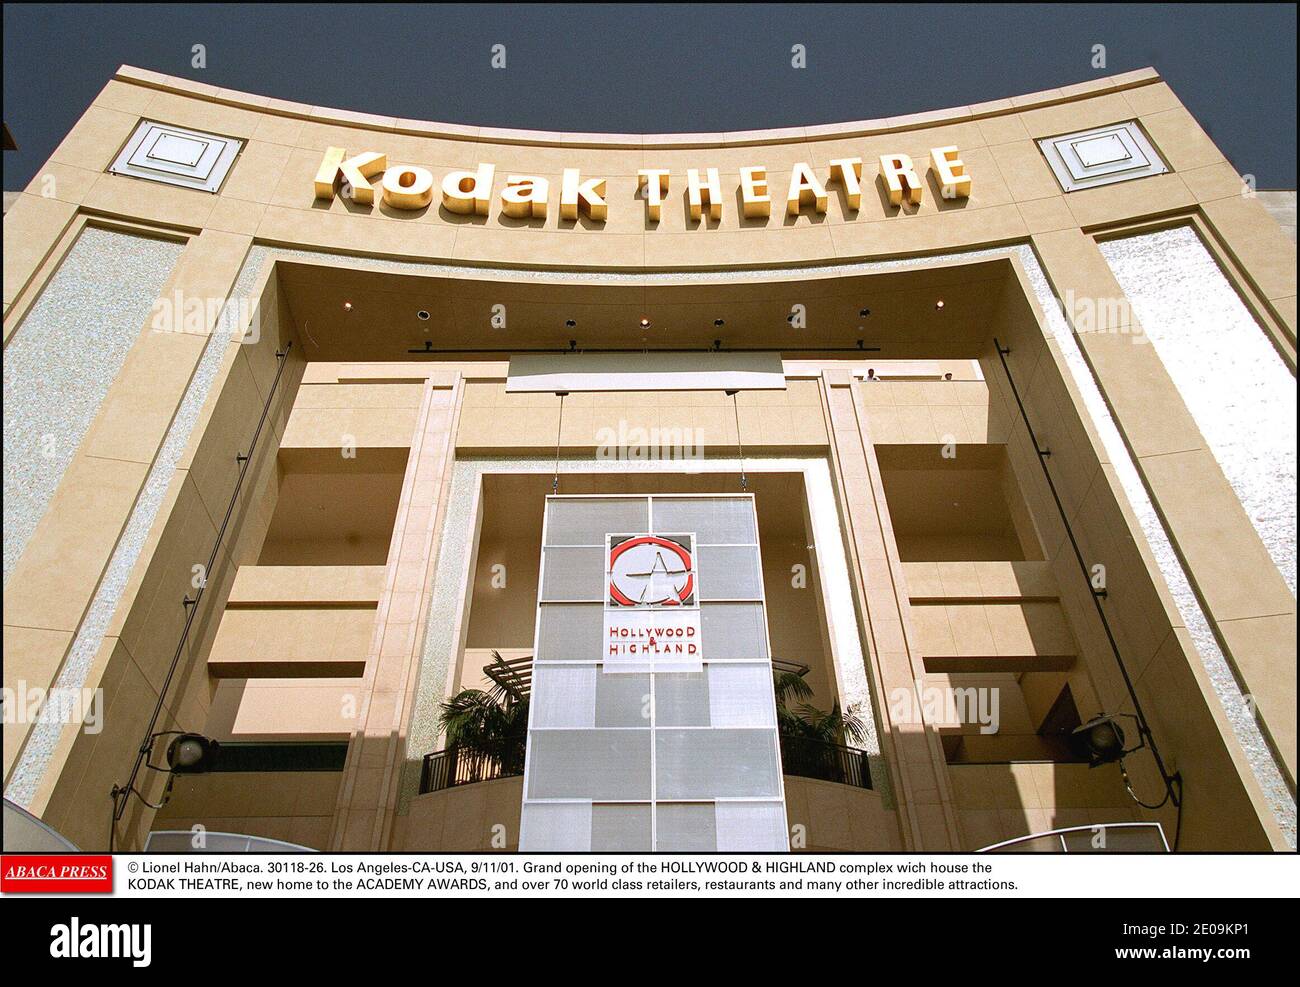 Eastman Kodak Co has asked the U.S. bankruptcy court to void an estimated 4 million Dollars-a-year contract to have its name on the Hollywood theatre that hosts the Oscars as the bankrupt photography company tries to reduce its debt it was announced February 2, 2012. File photo : © Lionel Hahn/Abaca. 30118-26. Los Angeles-CA-USA, 9/11/01. Grand opening of the HOLLYWOOD & HIGHLAND complex wich house the KODAK THEATRE, new home to the ACADEMY AWARDS, and over 70 world class retailers, restaurants and many other incredible attractions. Stock Photo